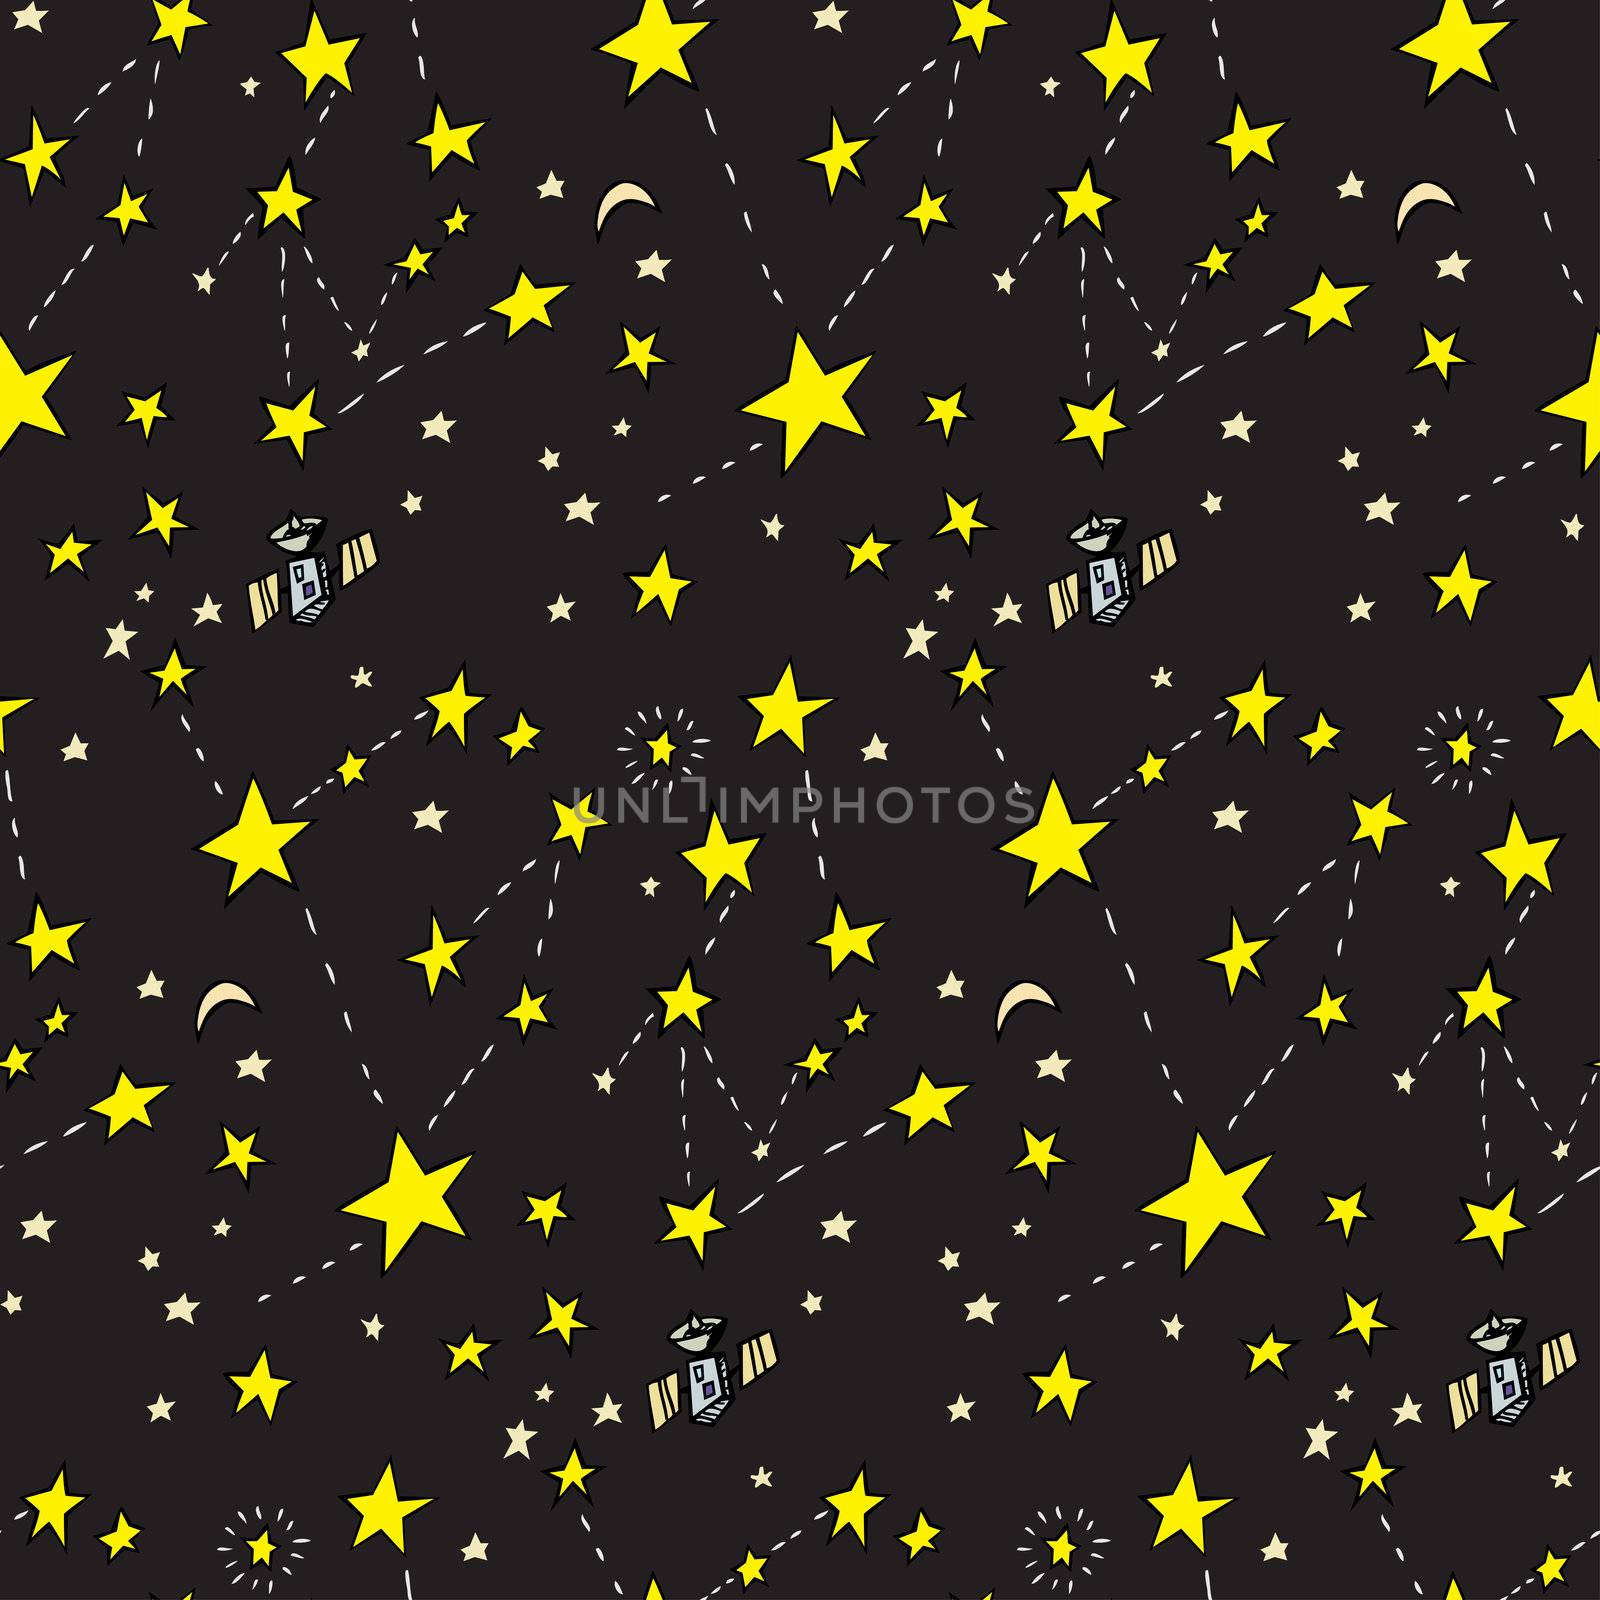 Seamless background of stars, moons and satellites over black